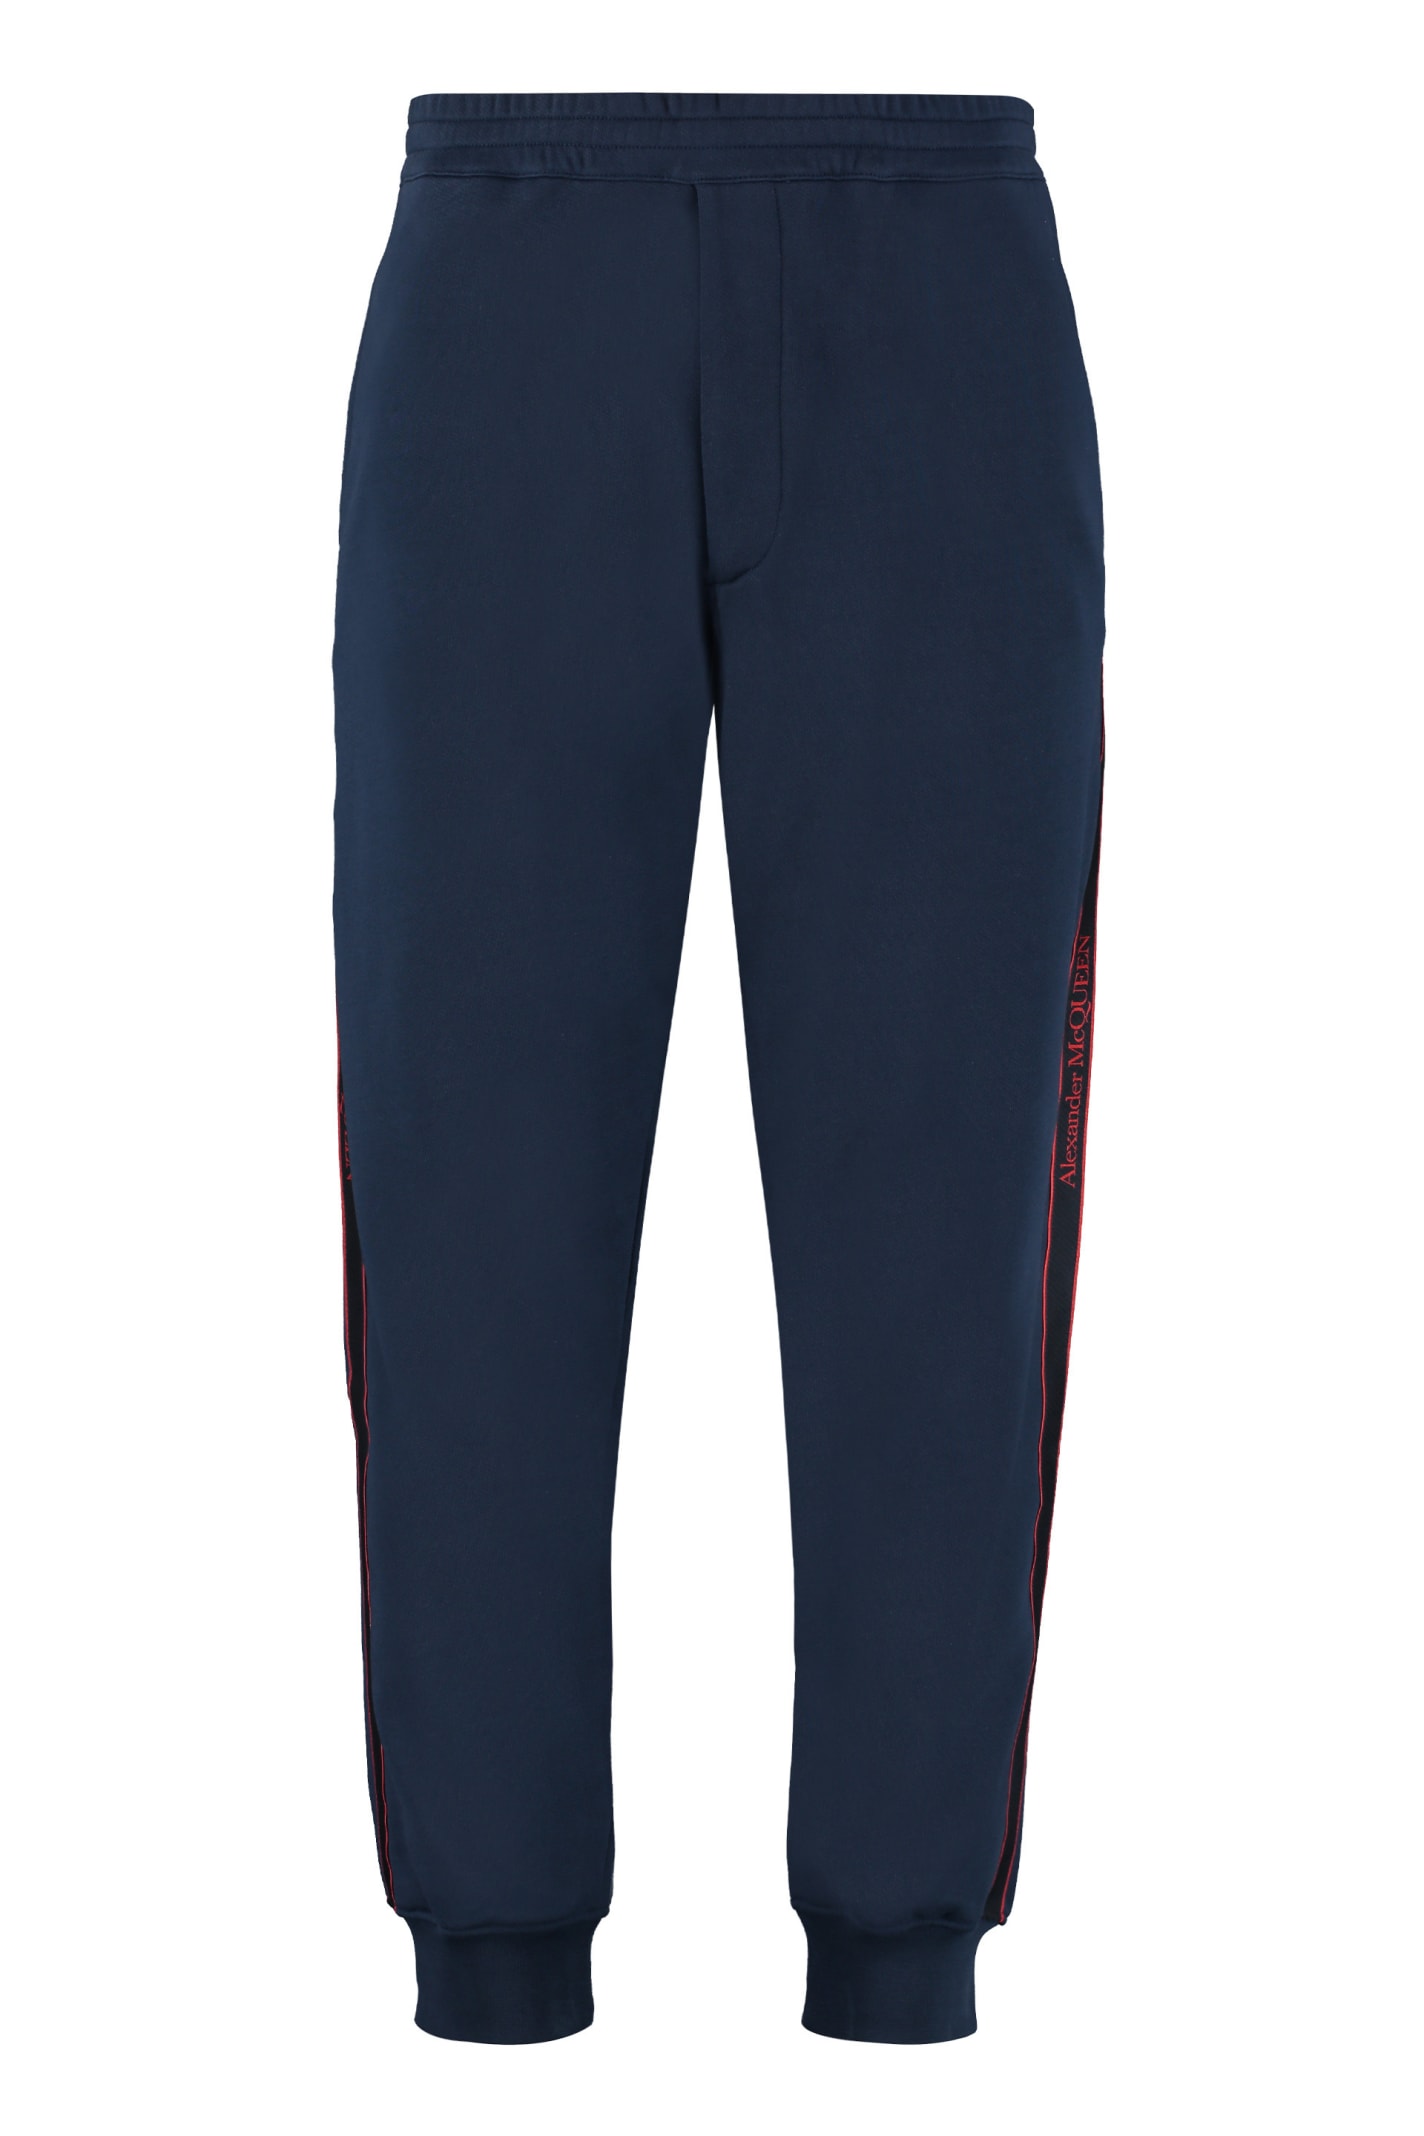 ALEXANDER MCQUEEN TRACK-PANTS WITH SIDE LOGO STRIPES